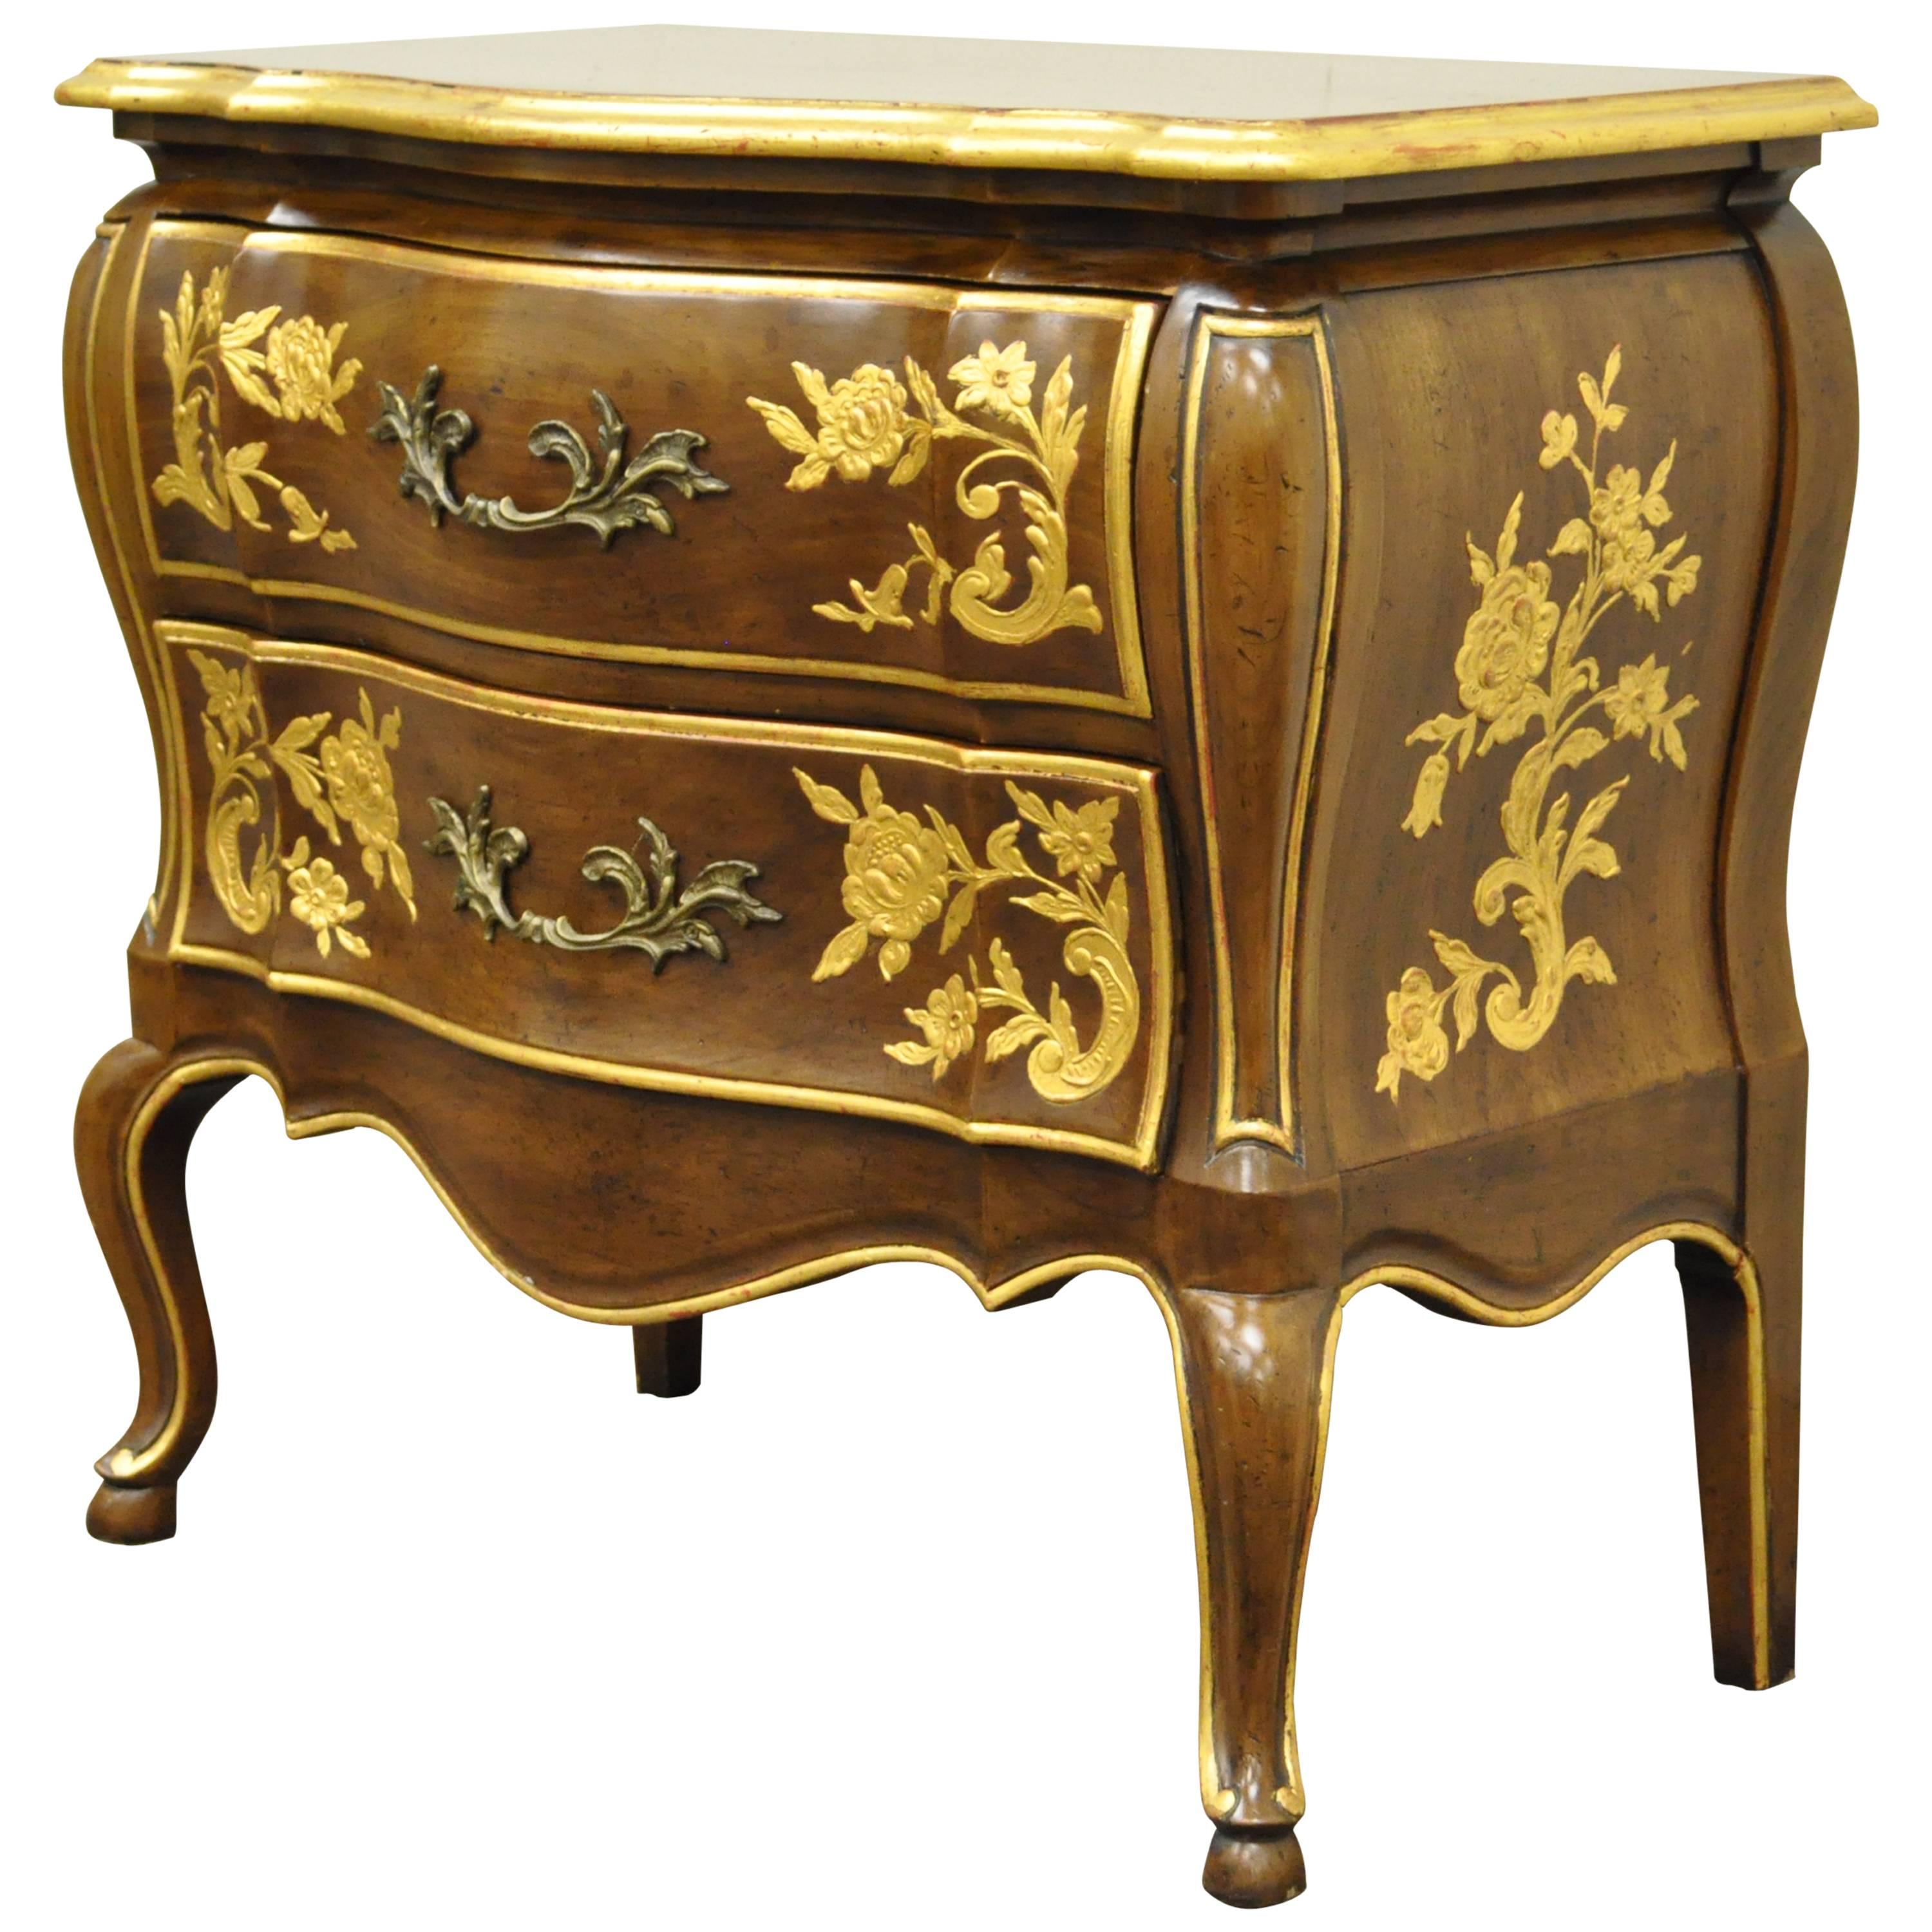 John Widdicomb Bombe Form Gold Gilt Decorated Chinoiserie Commode or Chest